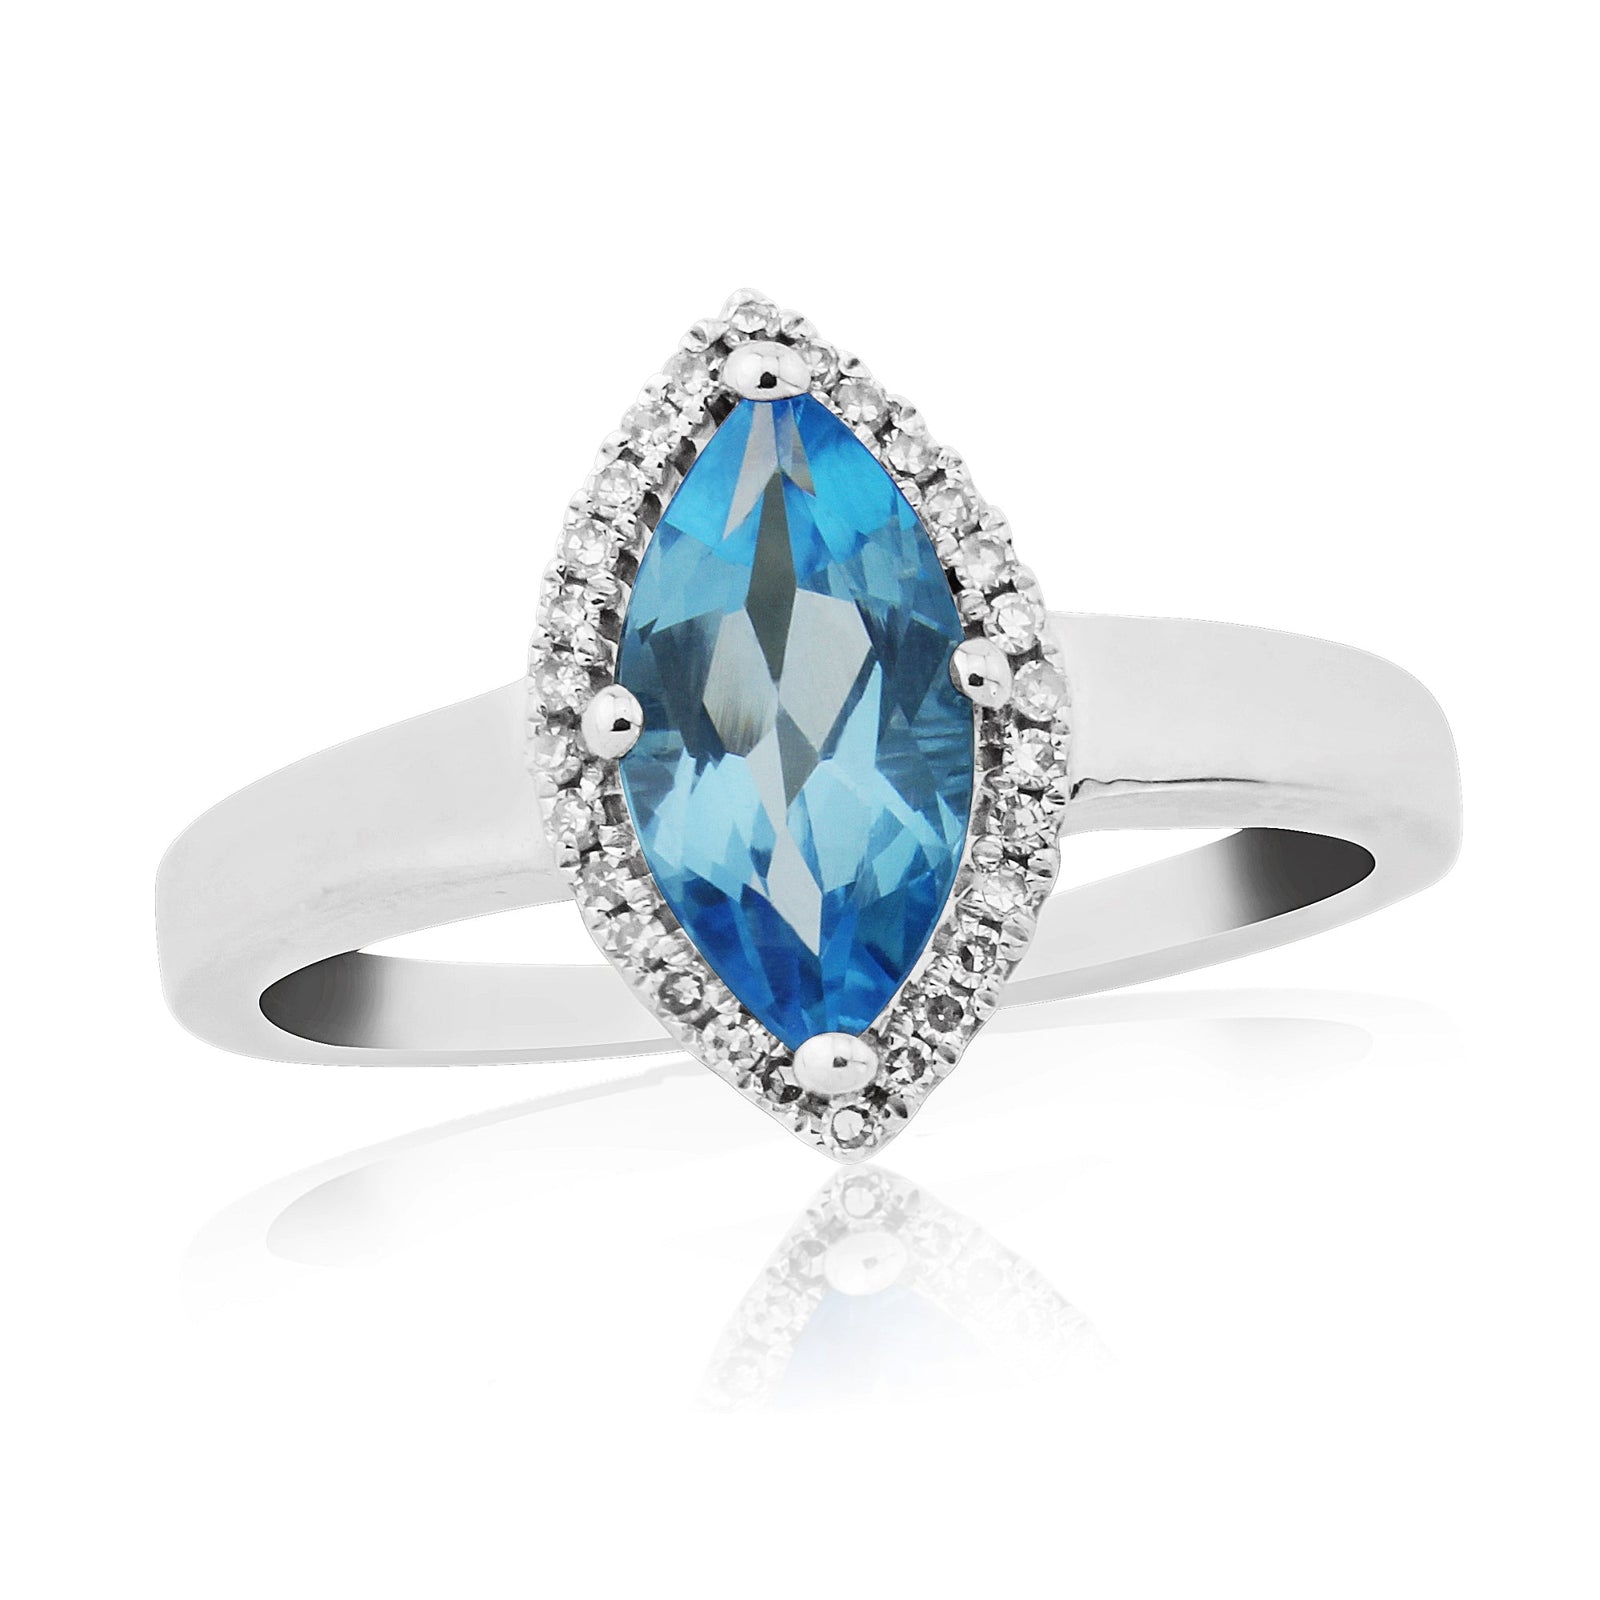 9ct white gold 10x5mm marquise shape blue topaz & diamond cluster ring 0.11ct